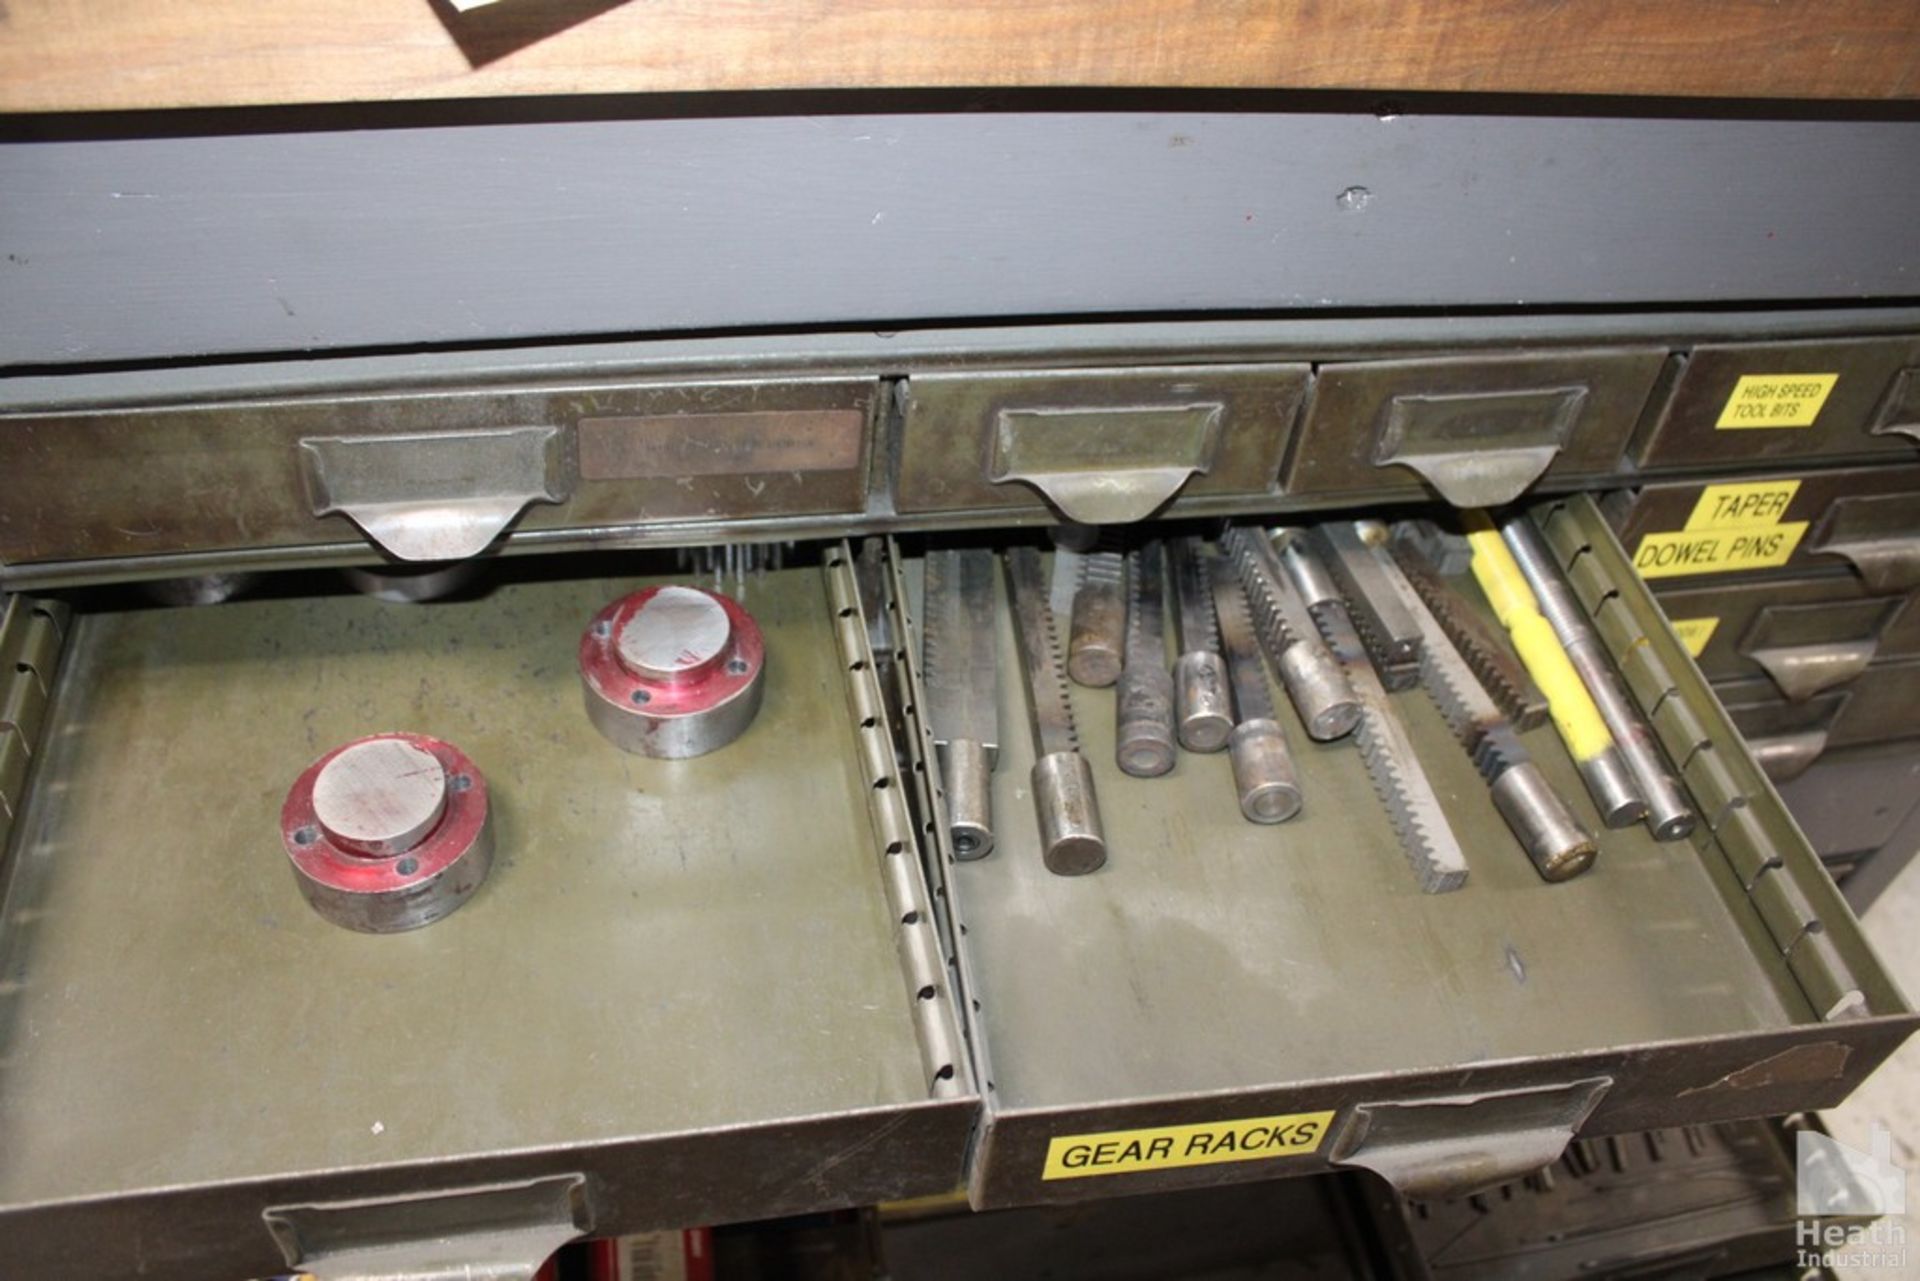 (4) PARTS CABINETS WITH CONTENTS - BEARINGS, GEAR RACKS, ETC. - Image 3 of 6